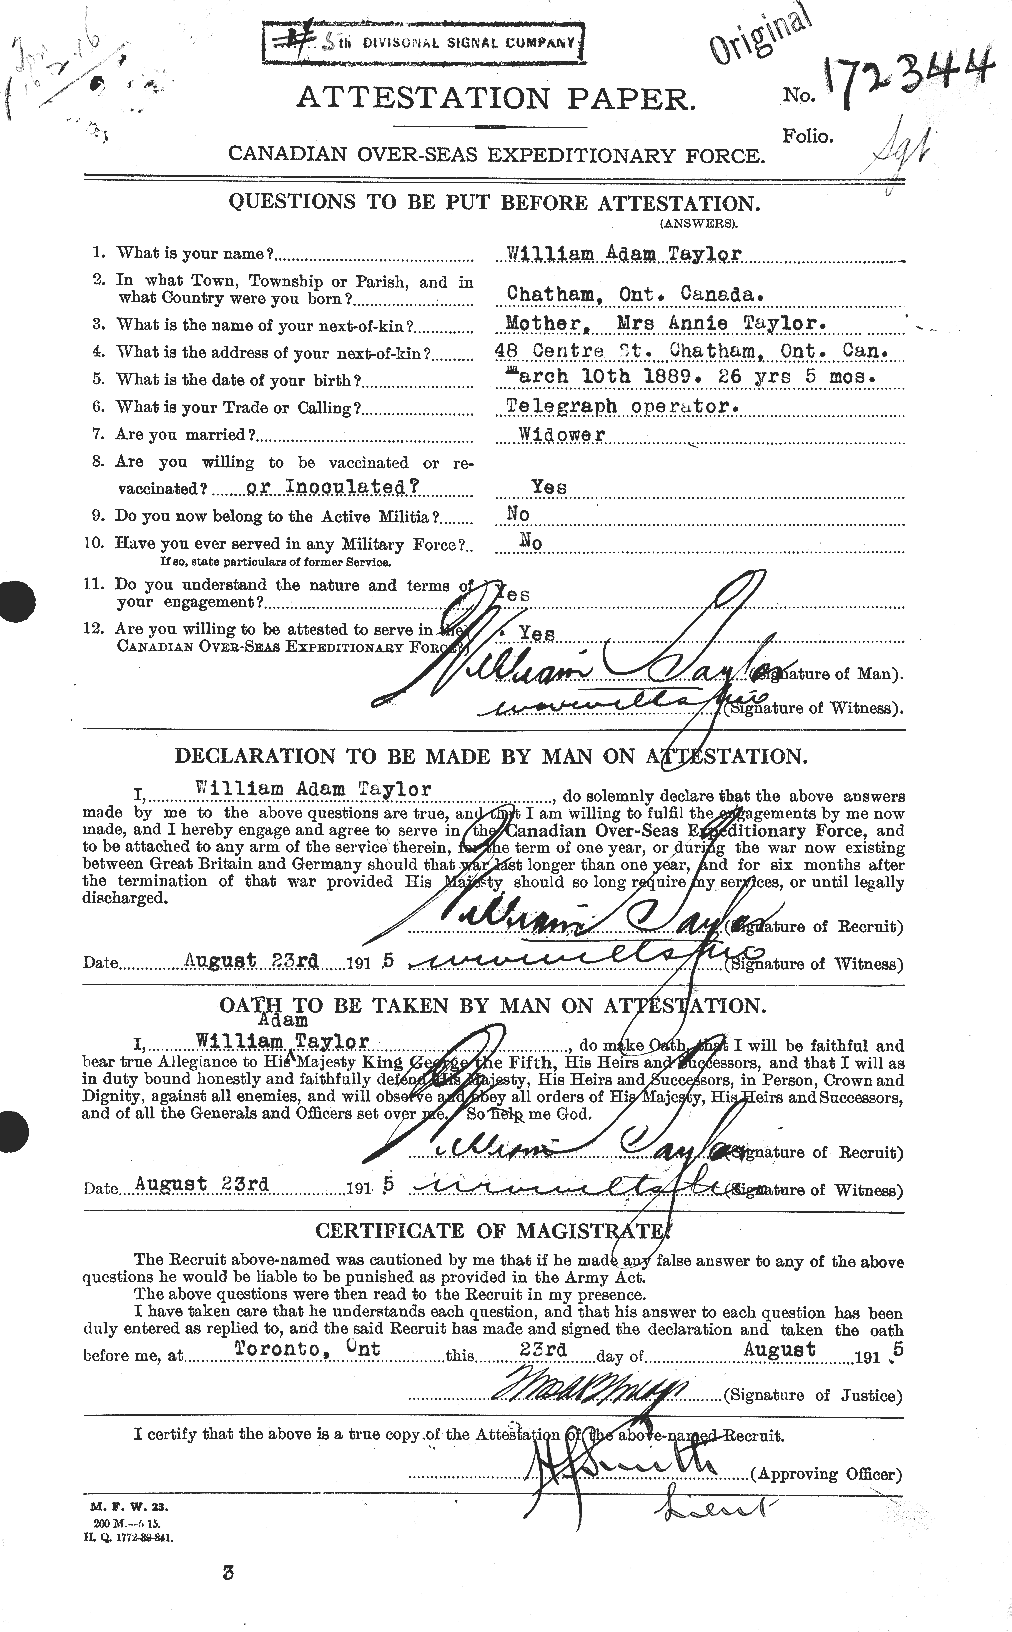 Personnel Records of the First World War - CEF 628195a